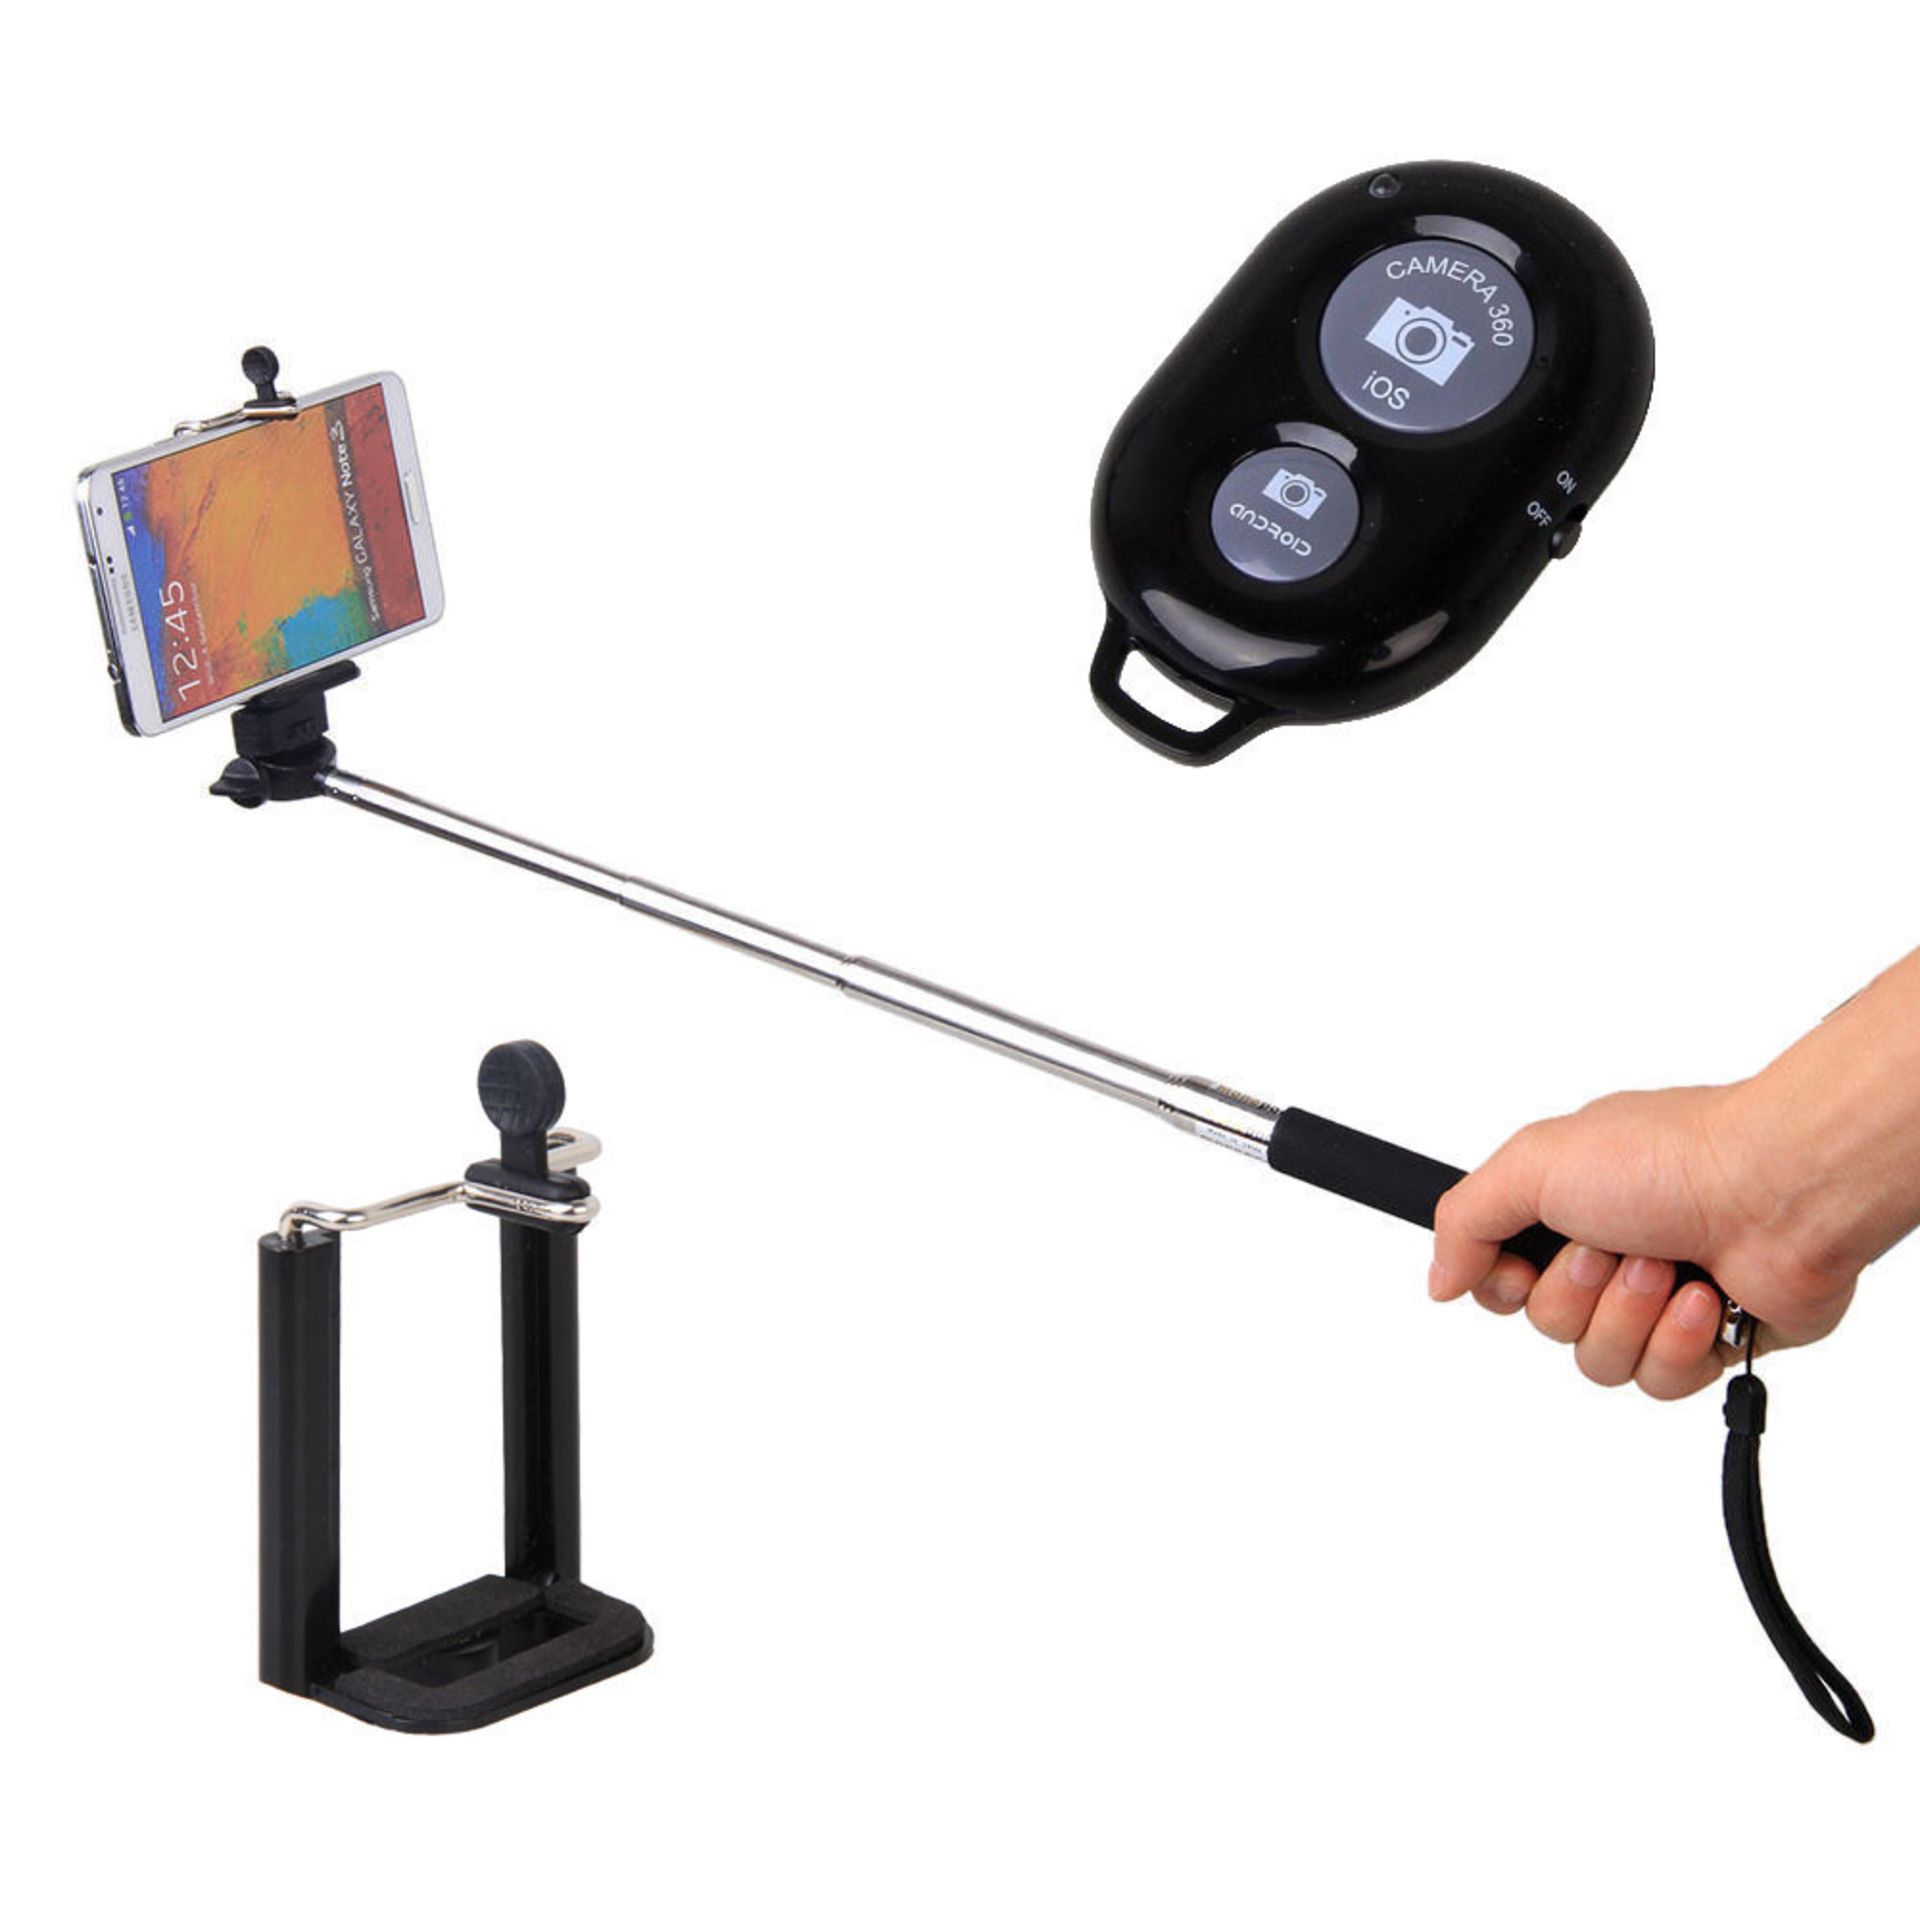 V *TRADE QTY* Brand New Selfie Stick with Bluetooth Remote Control - RRP £19.09 X 20 YOUR BID